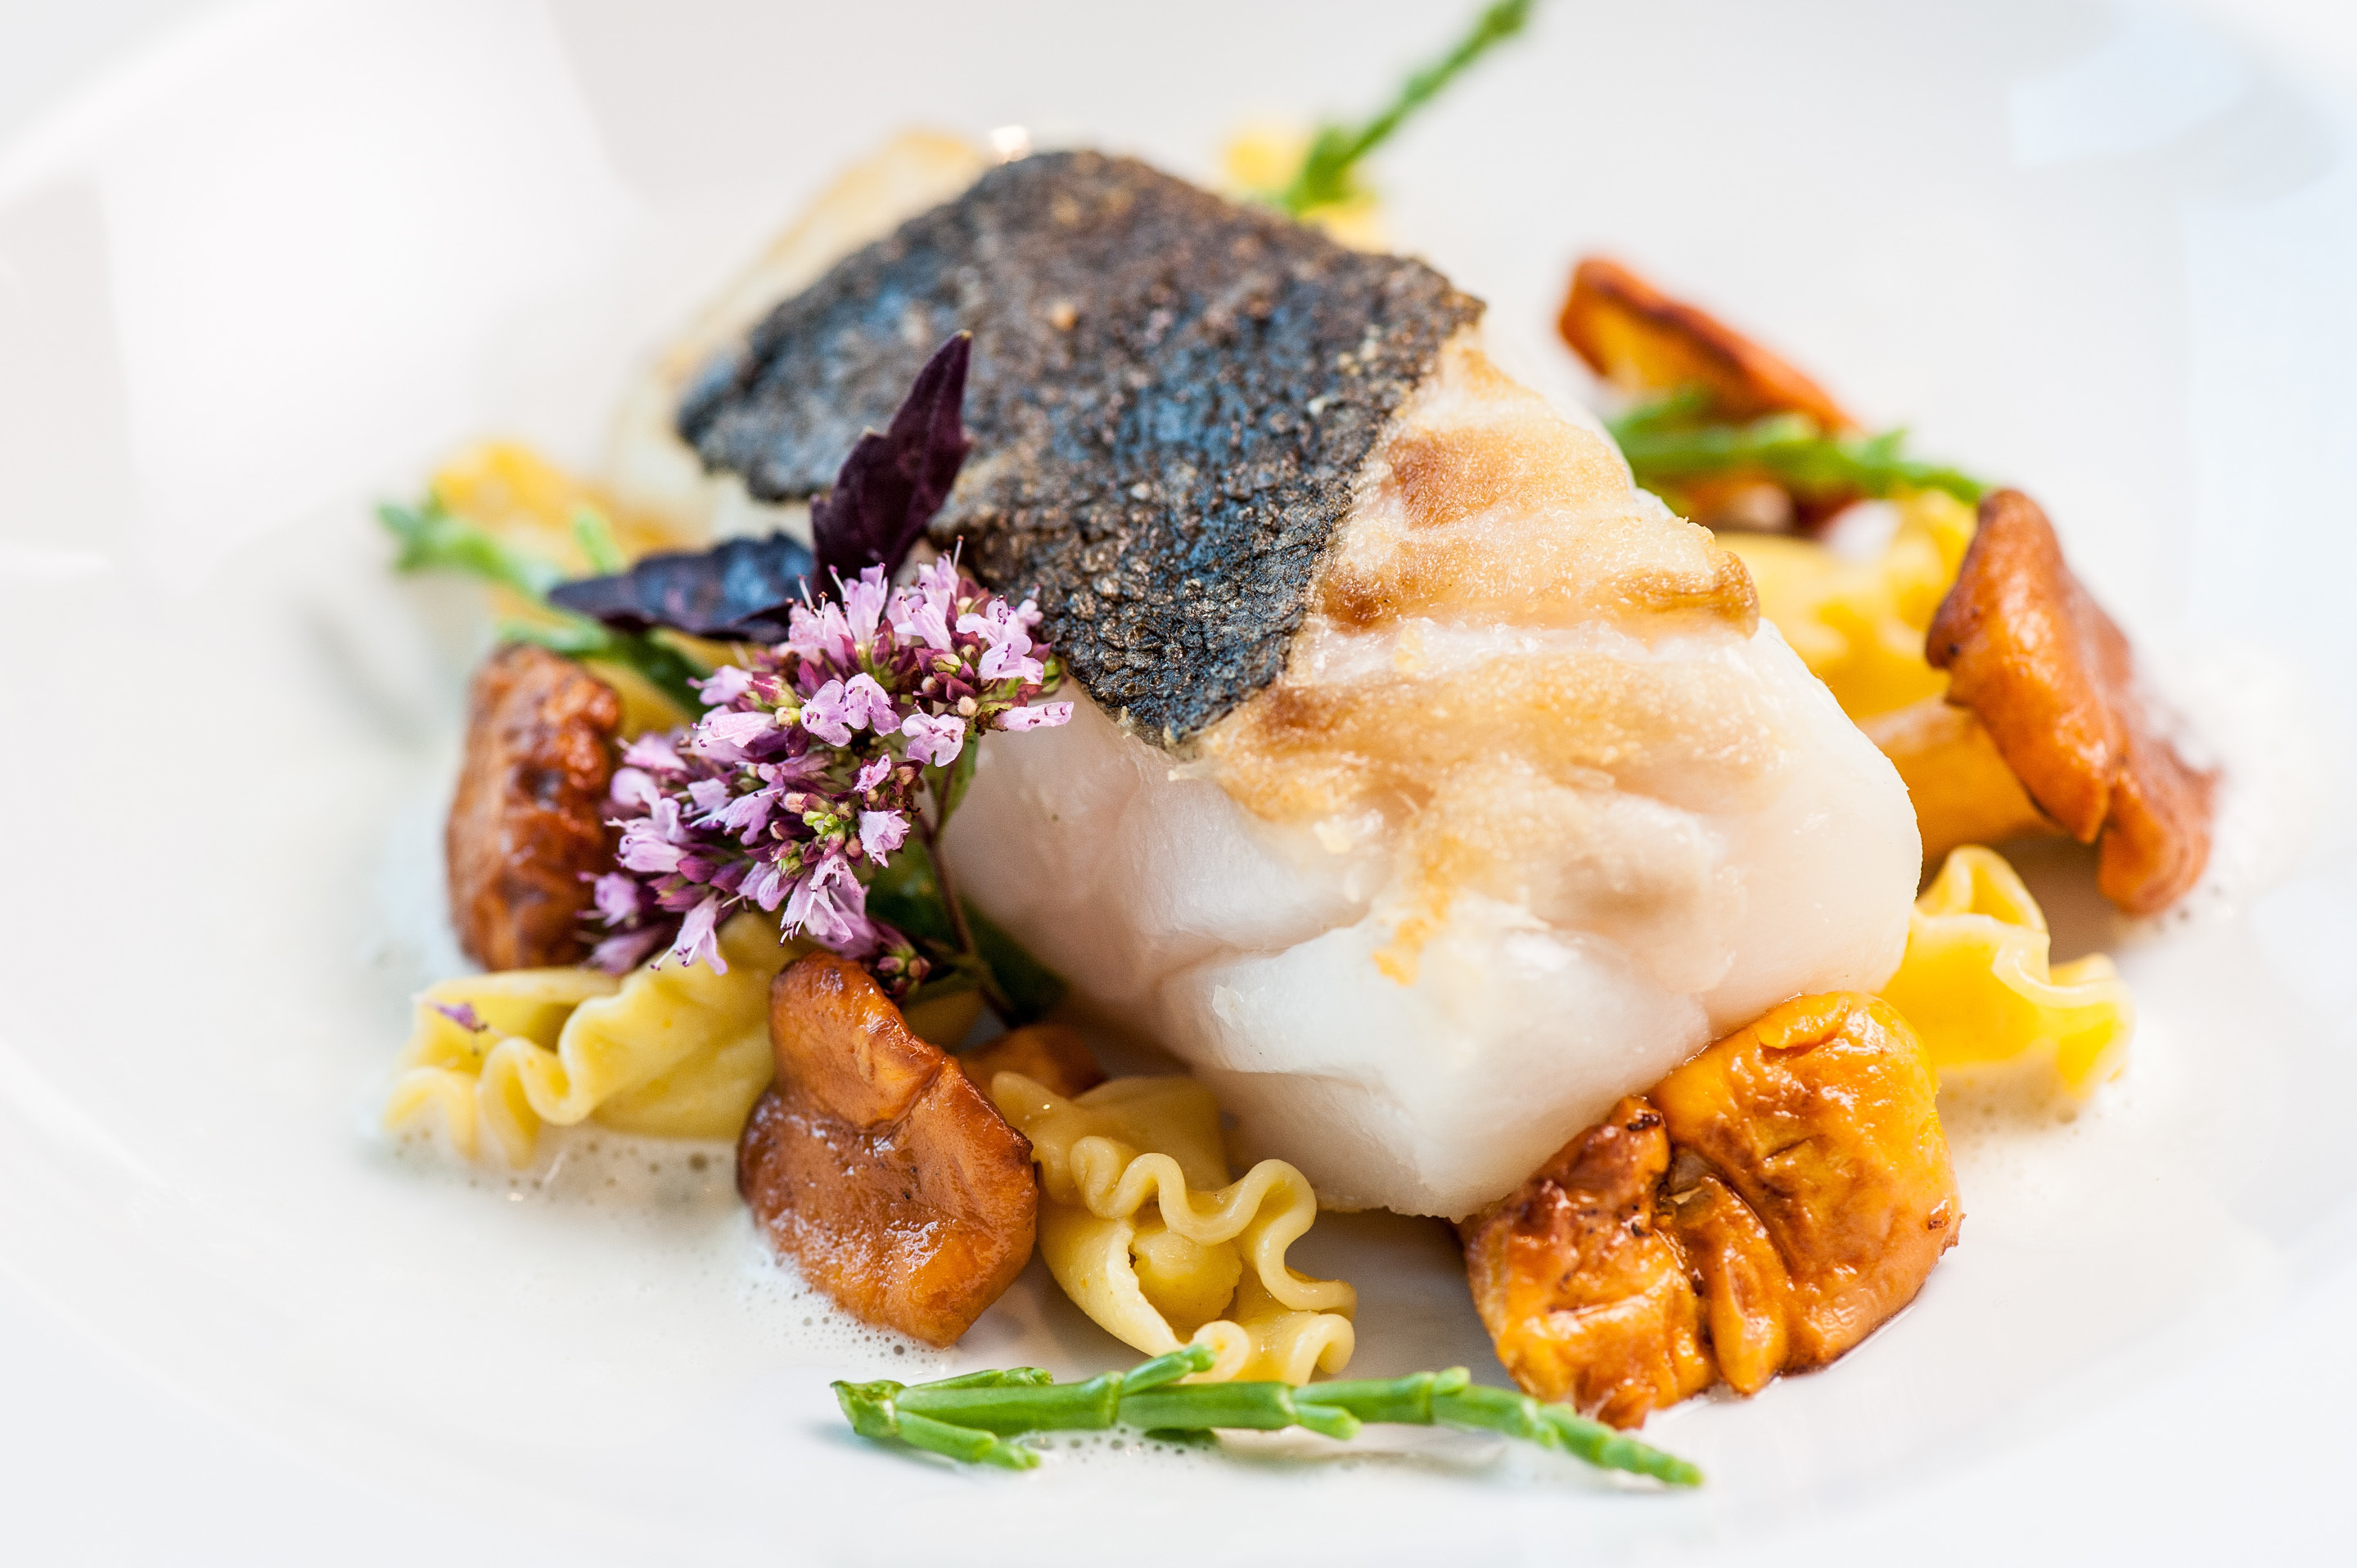 Experience the culinary senses with all the 'North German tradition' in the restaurant Fischers Fritz in the 4-star hotel Ringhotel Birke in Kiel